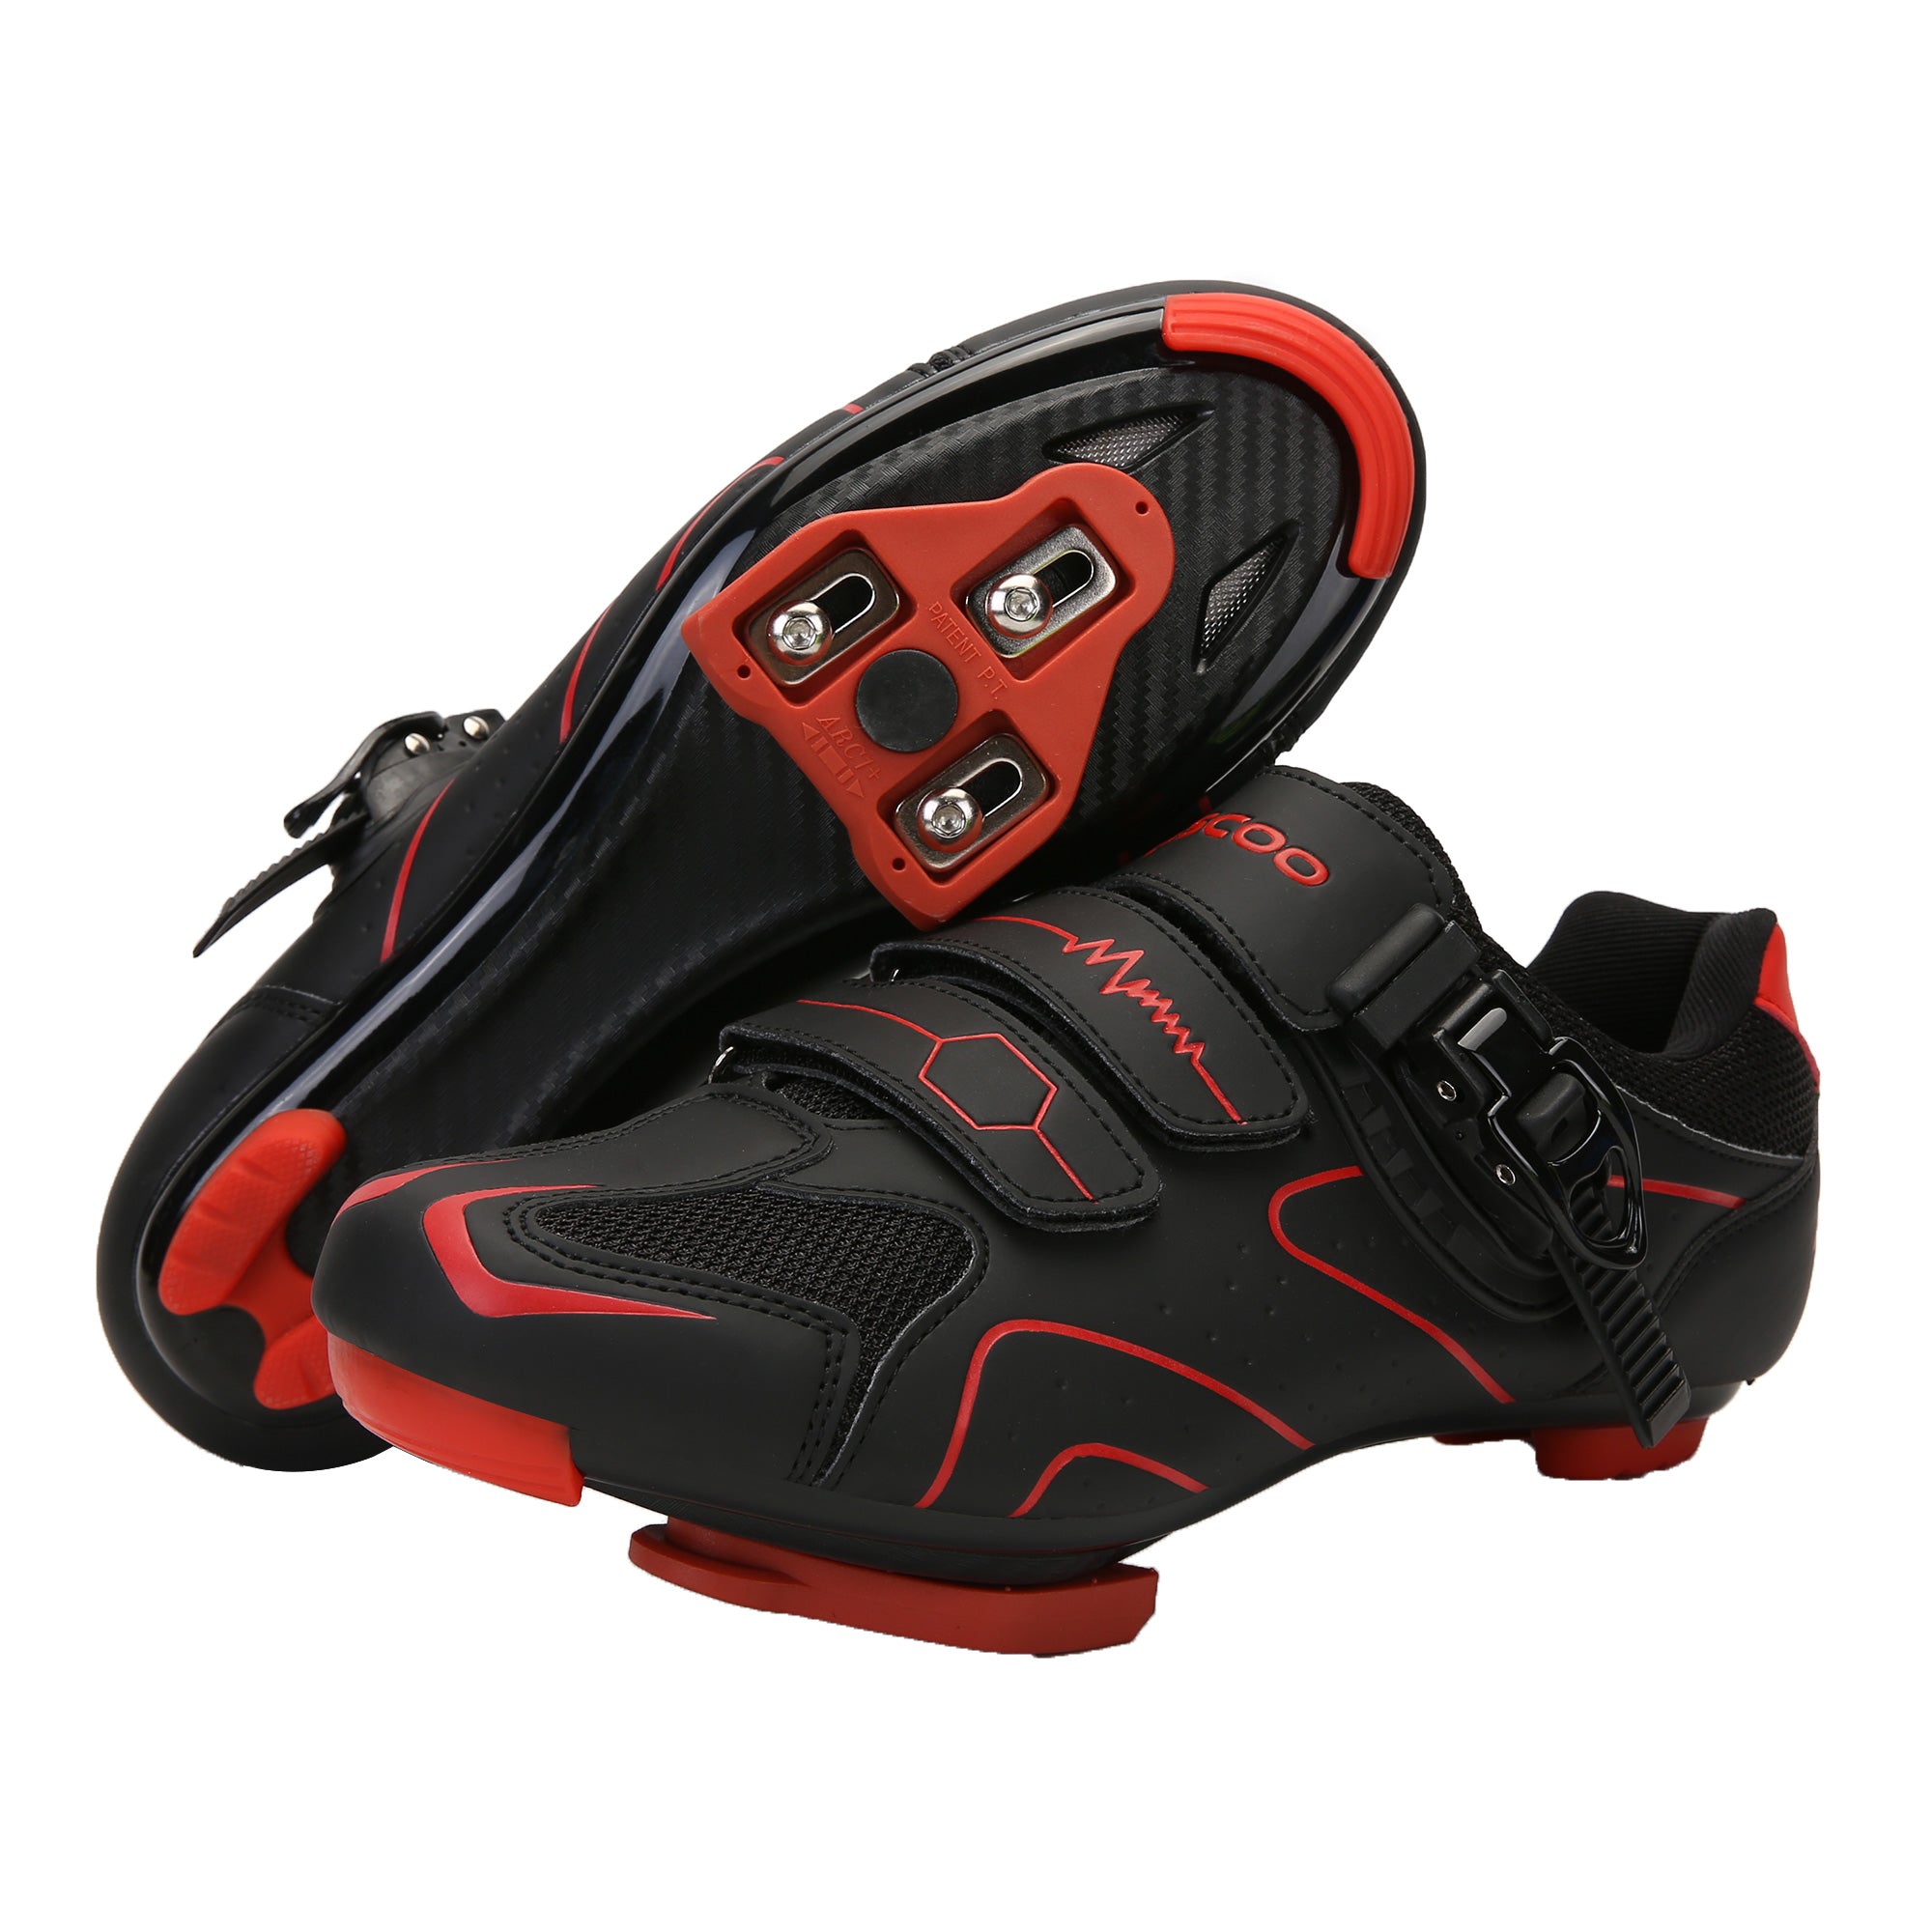 Types of Delta Cycling Shoes